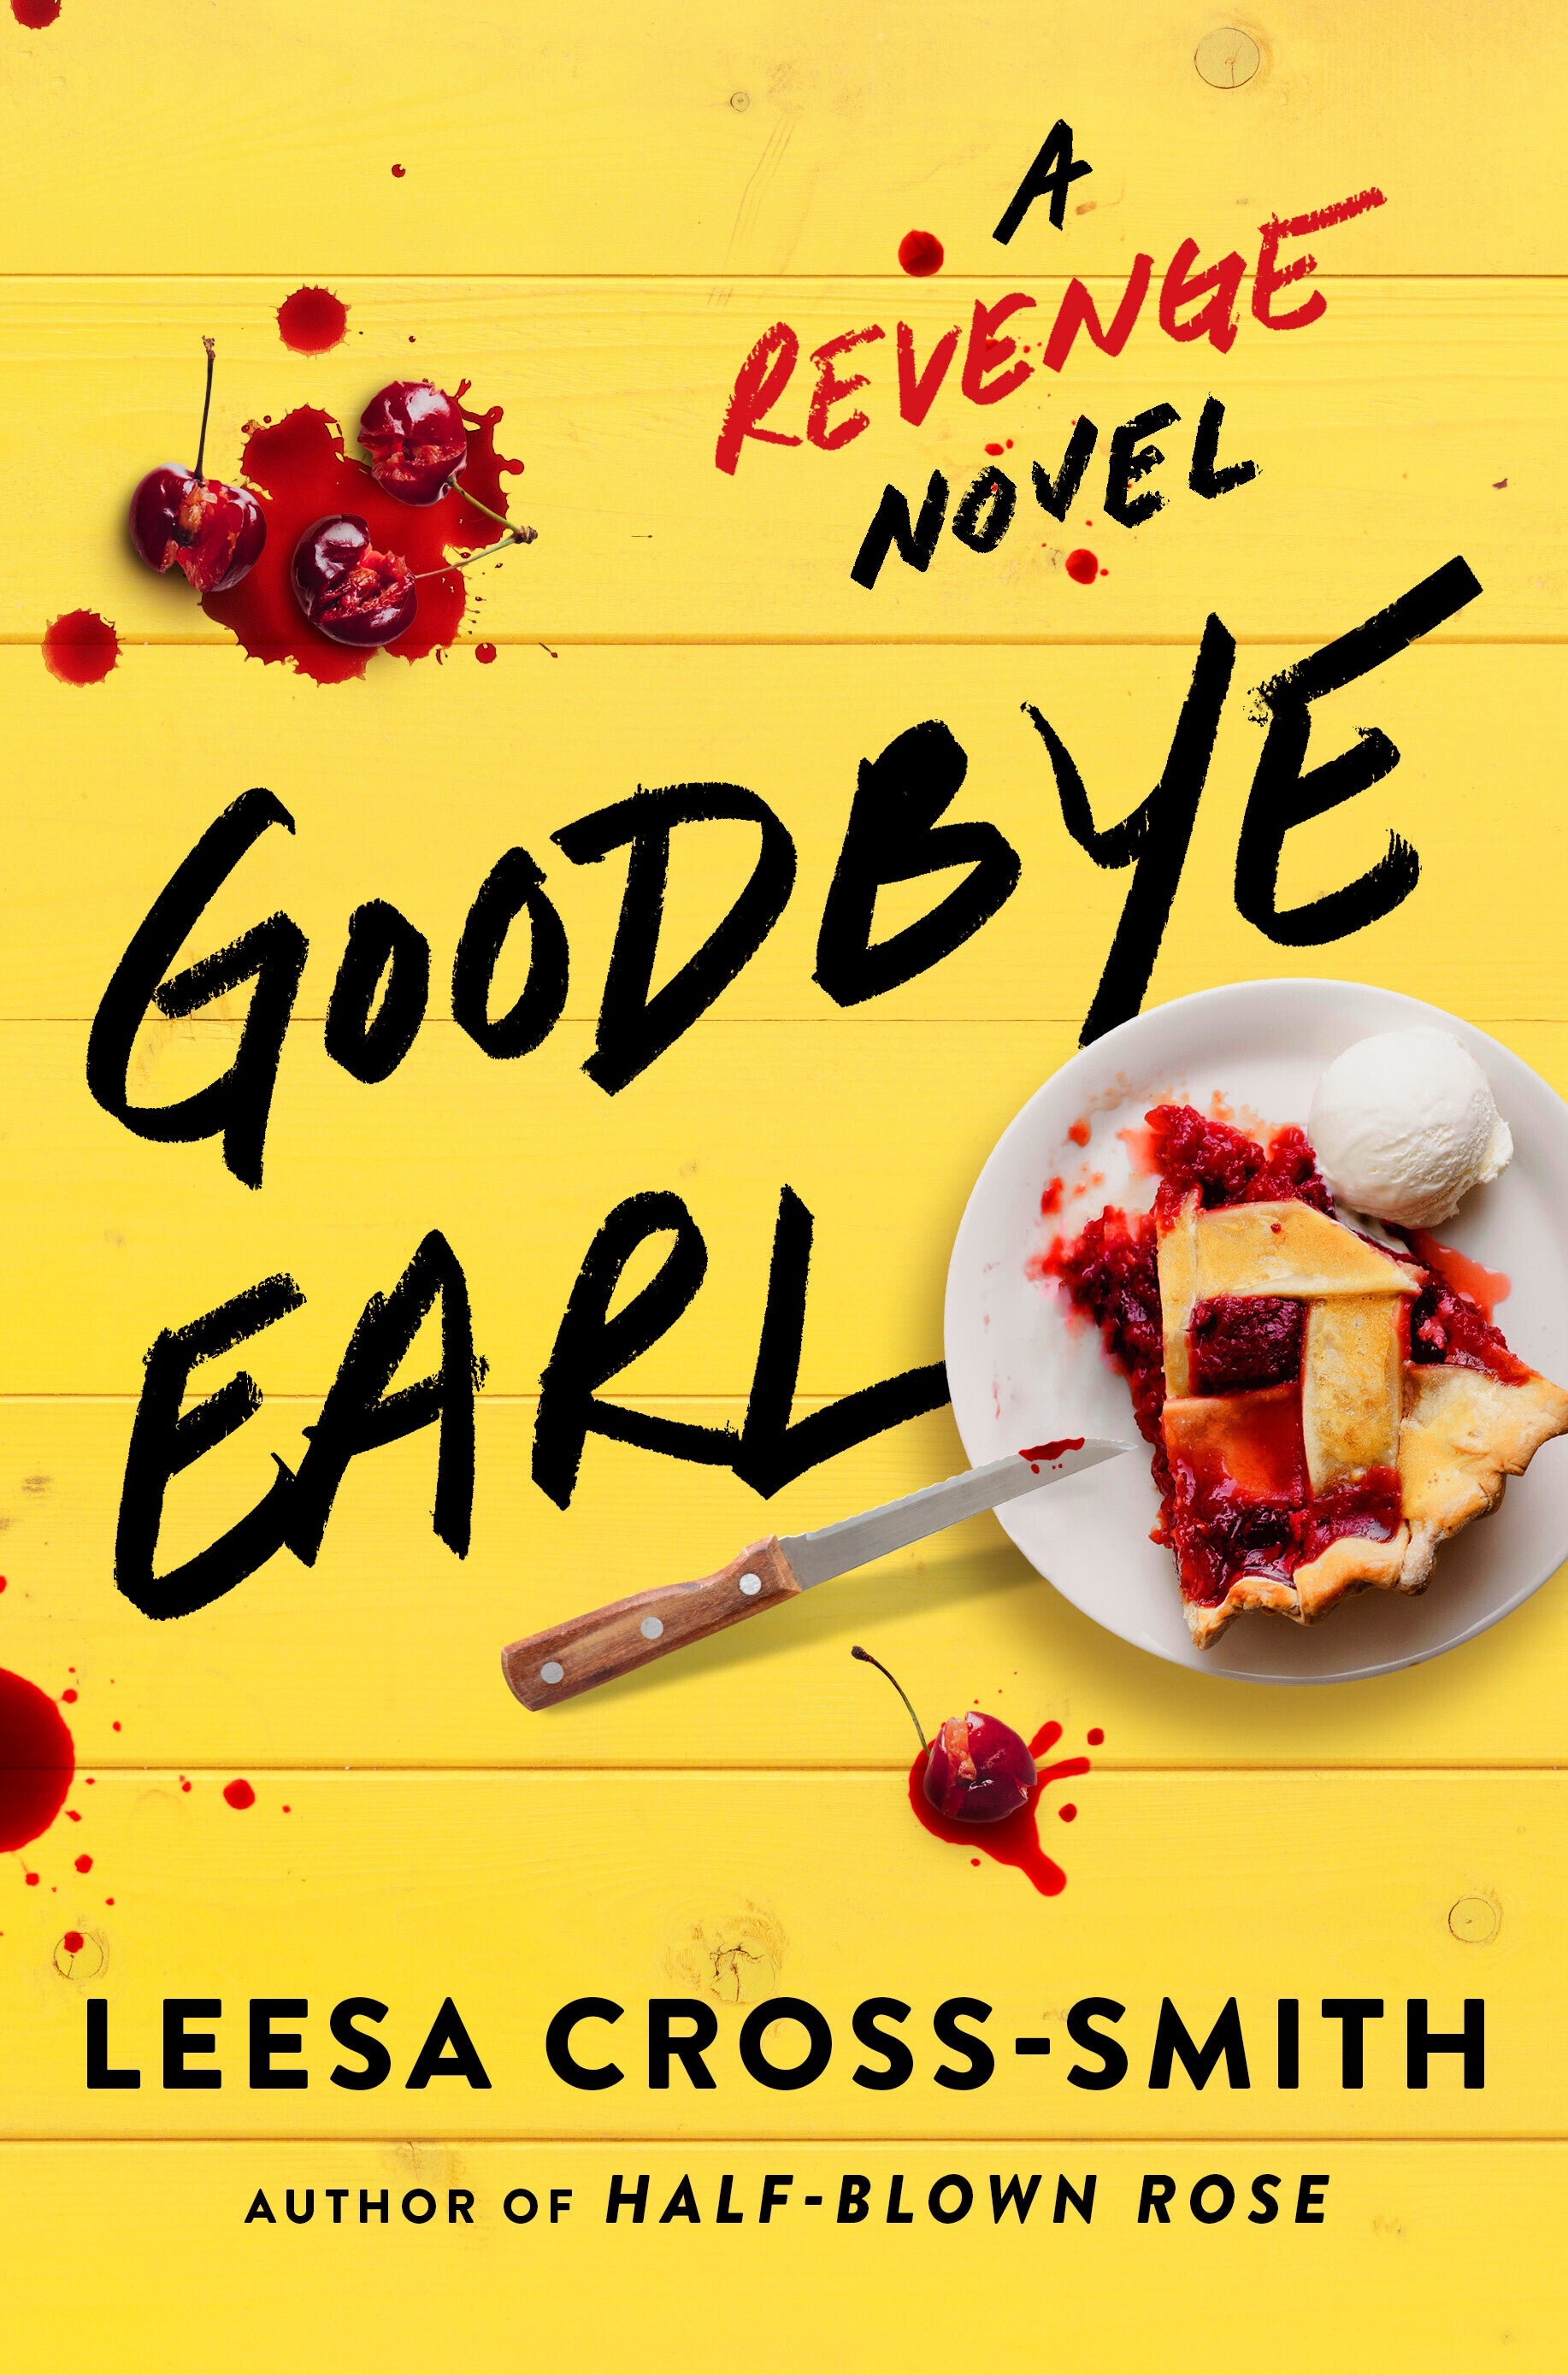 Book Review - Goodbye Earl